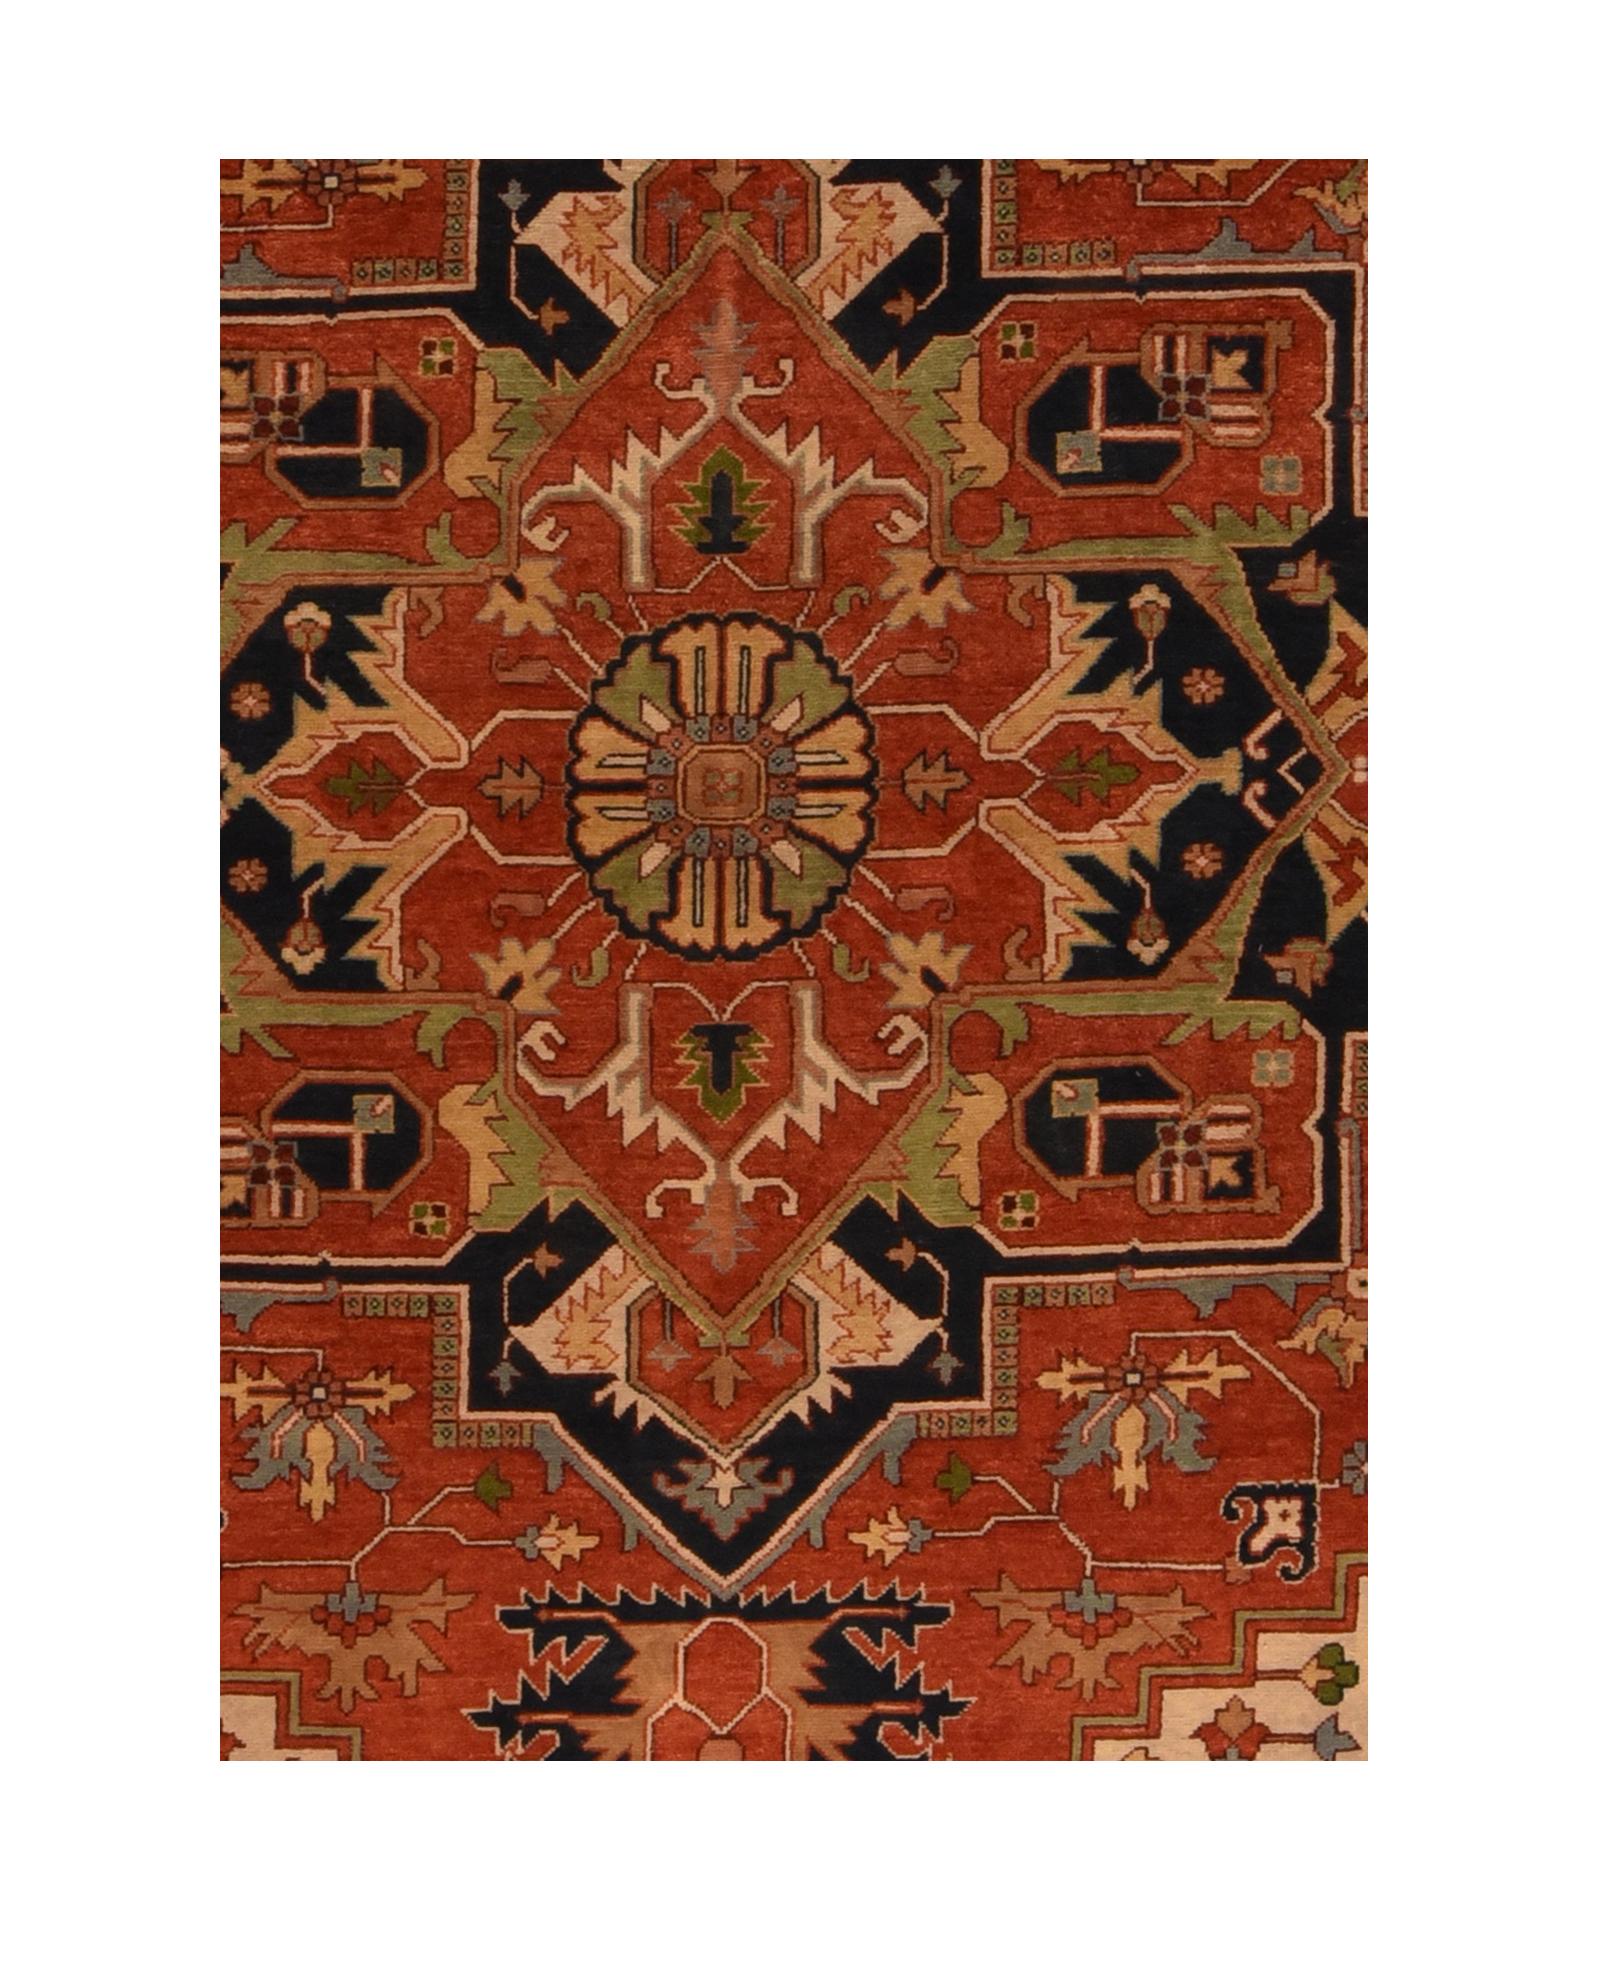 Extremely Fine Vintage Persian Isfahan Area Rug, hand knotted

Design: Central Medalion

He art of manufacturing carpets was introduced in India, probably by the great mogul Akbar (1556-1605) which brought in Persian weavers together with skilled